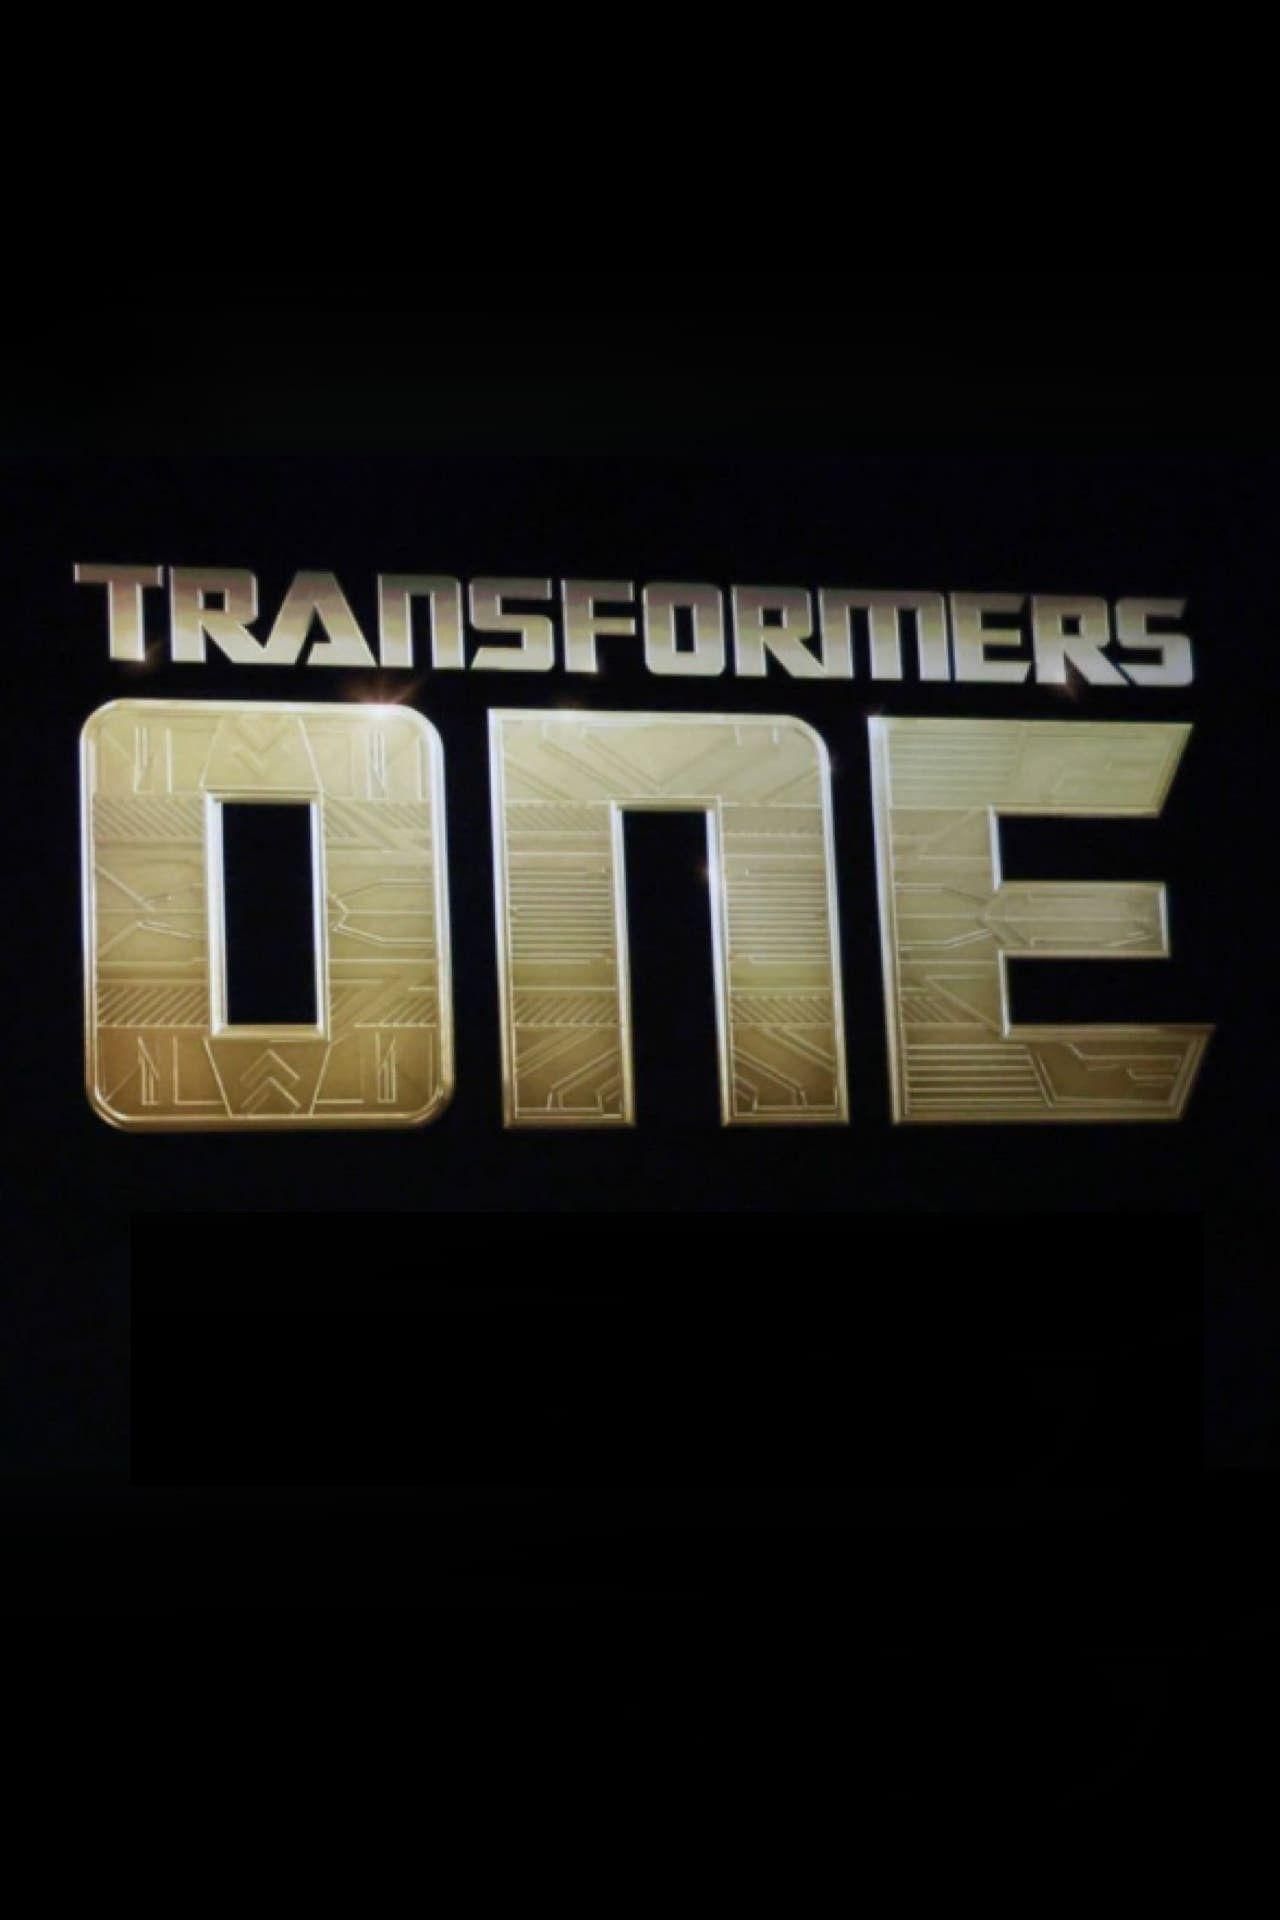 Transformers One Teaser Poster